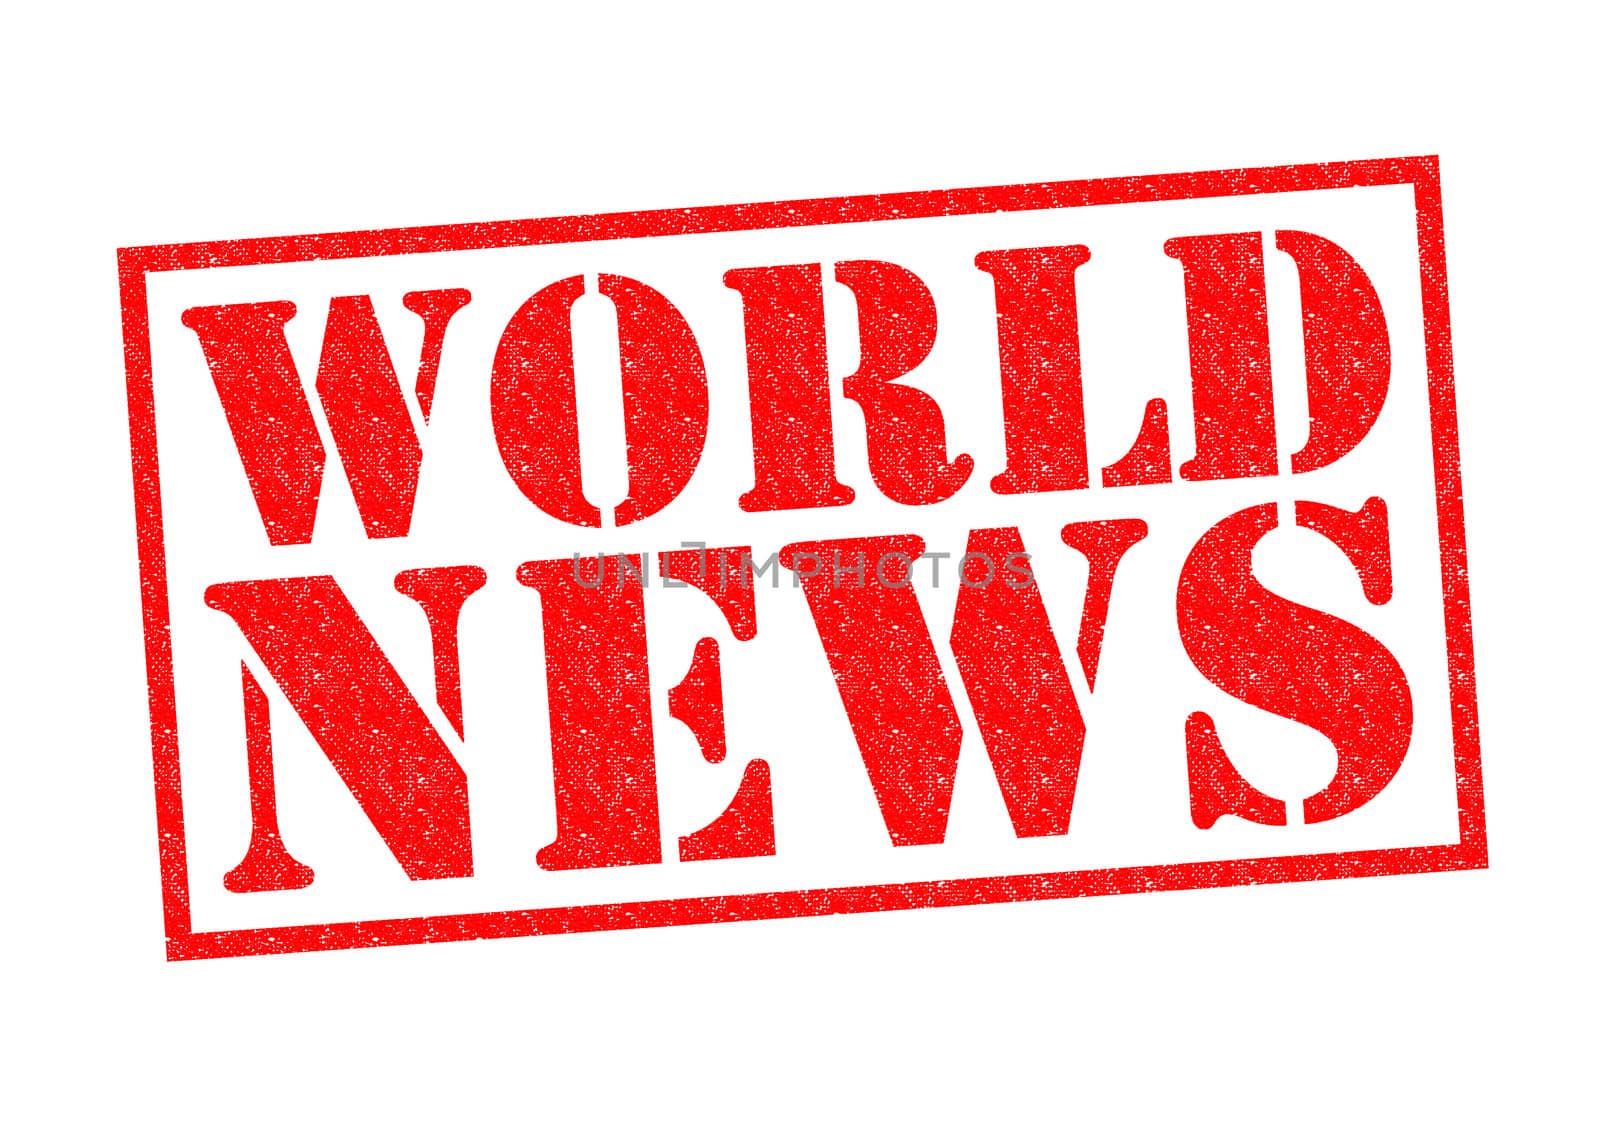 WORLD NEWS red Rubber Stamp over a white background.